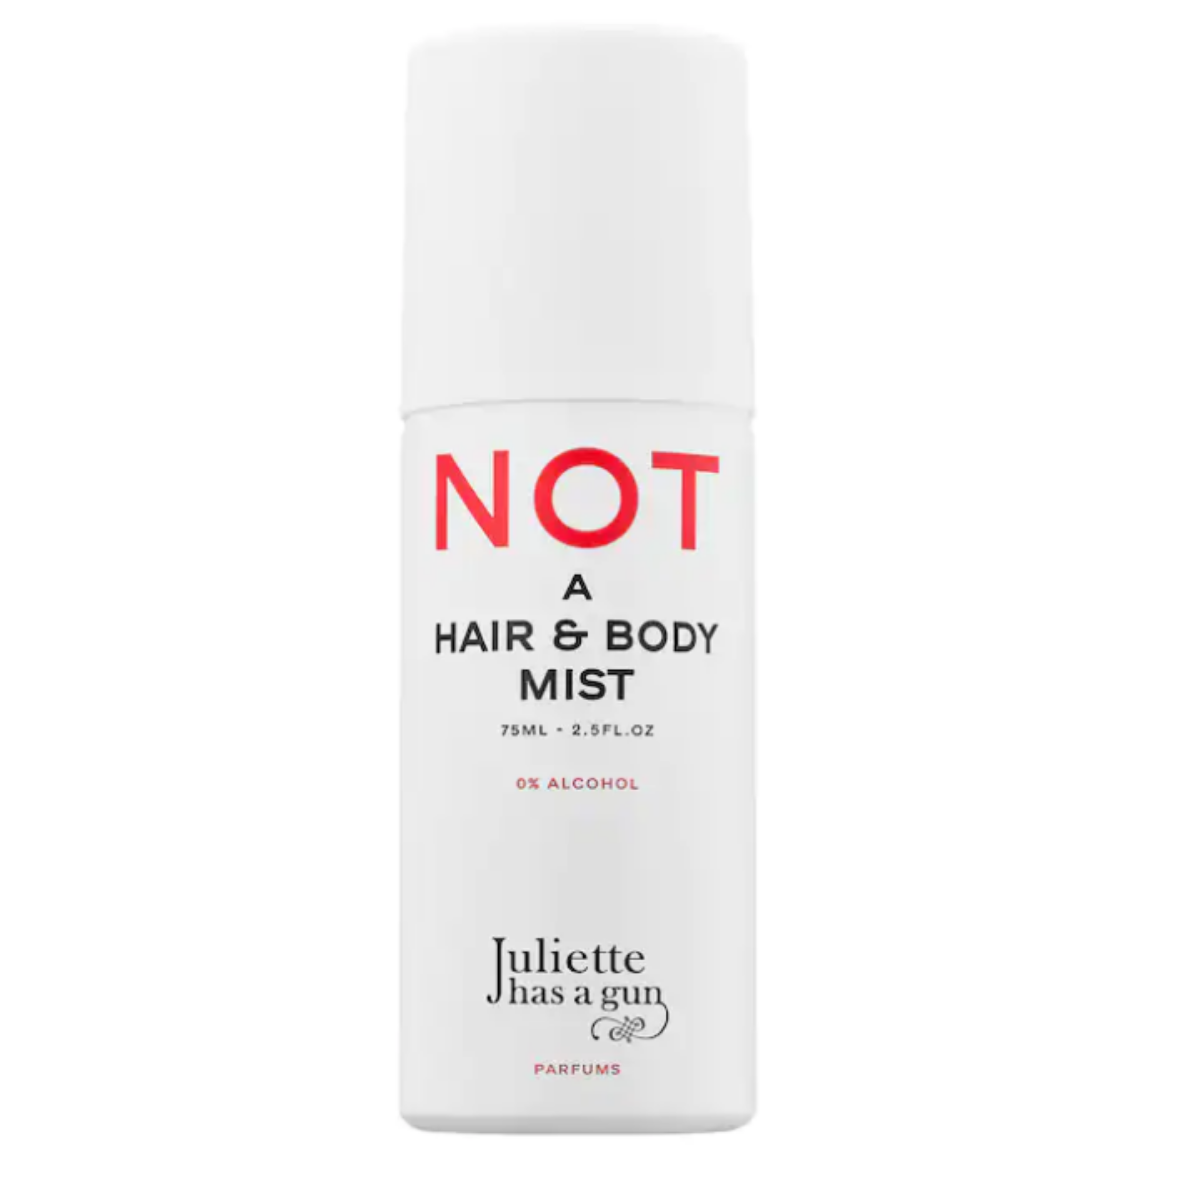 Primary image of Not A Hair & Body Mist